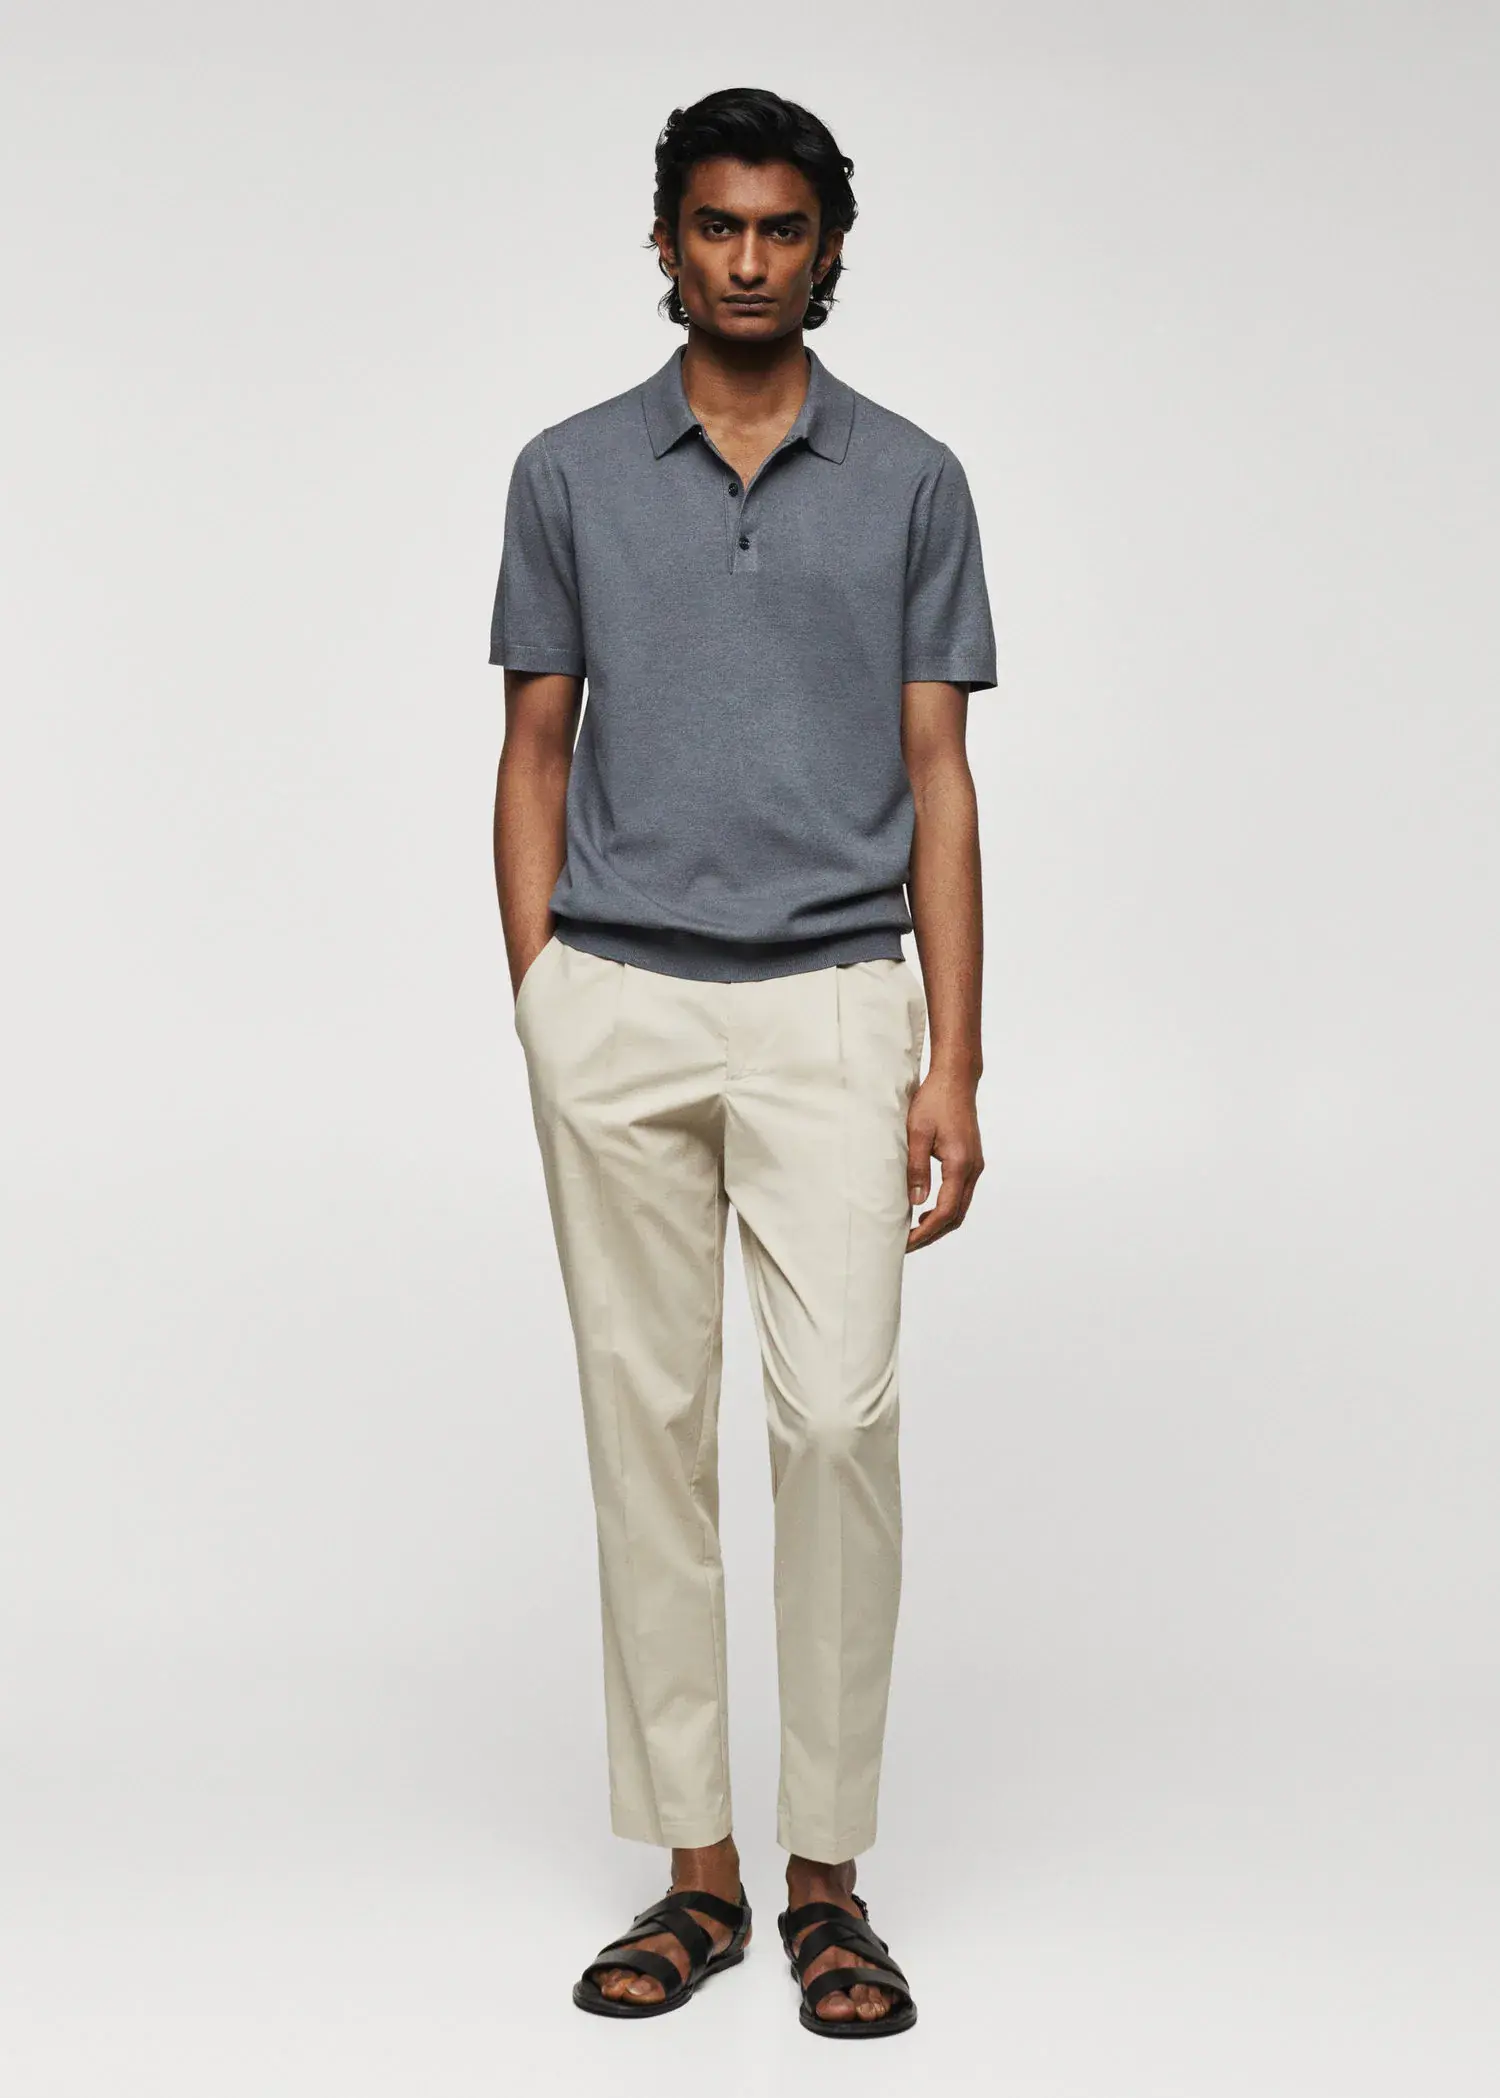 Mango Fine-knit polo shirt. a man in a gray polo shirt and beige pants. 